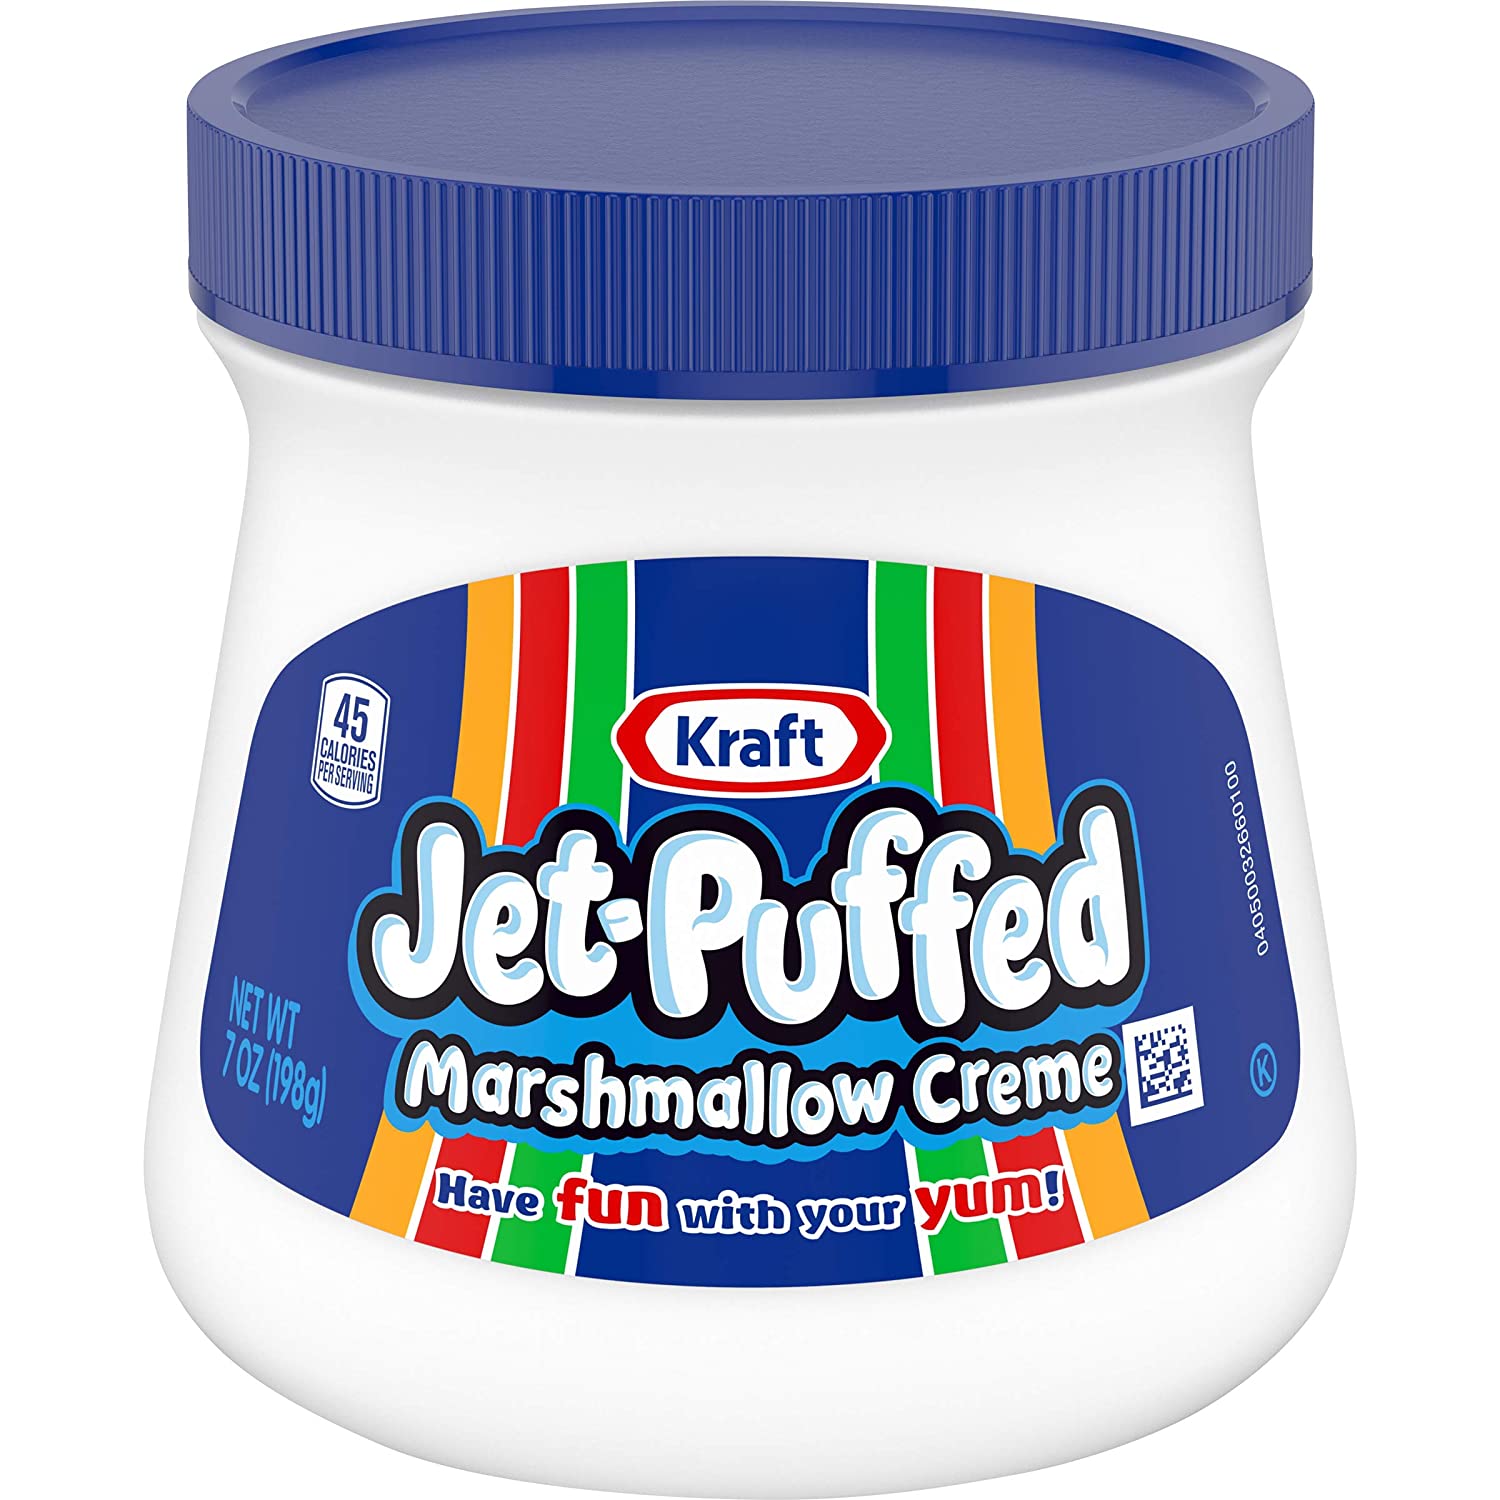 Amazon has the 7 oz jar of Jet-Puffed Marshmallow, Crème Spread for only $1...